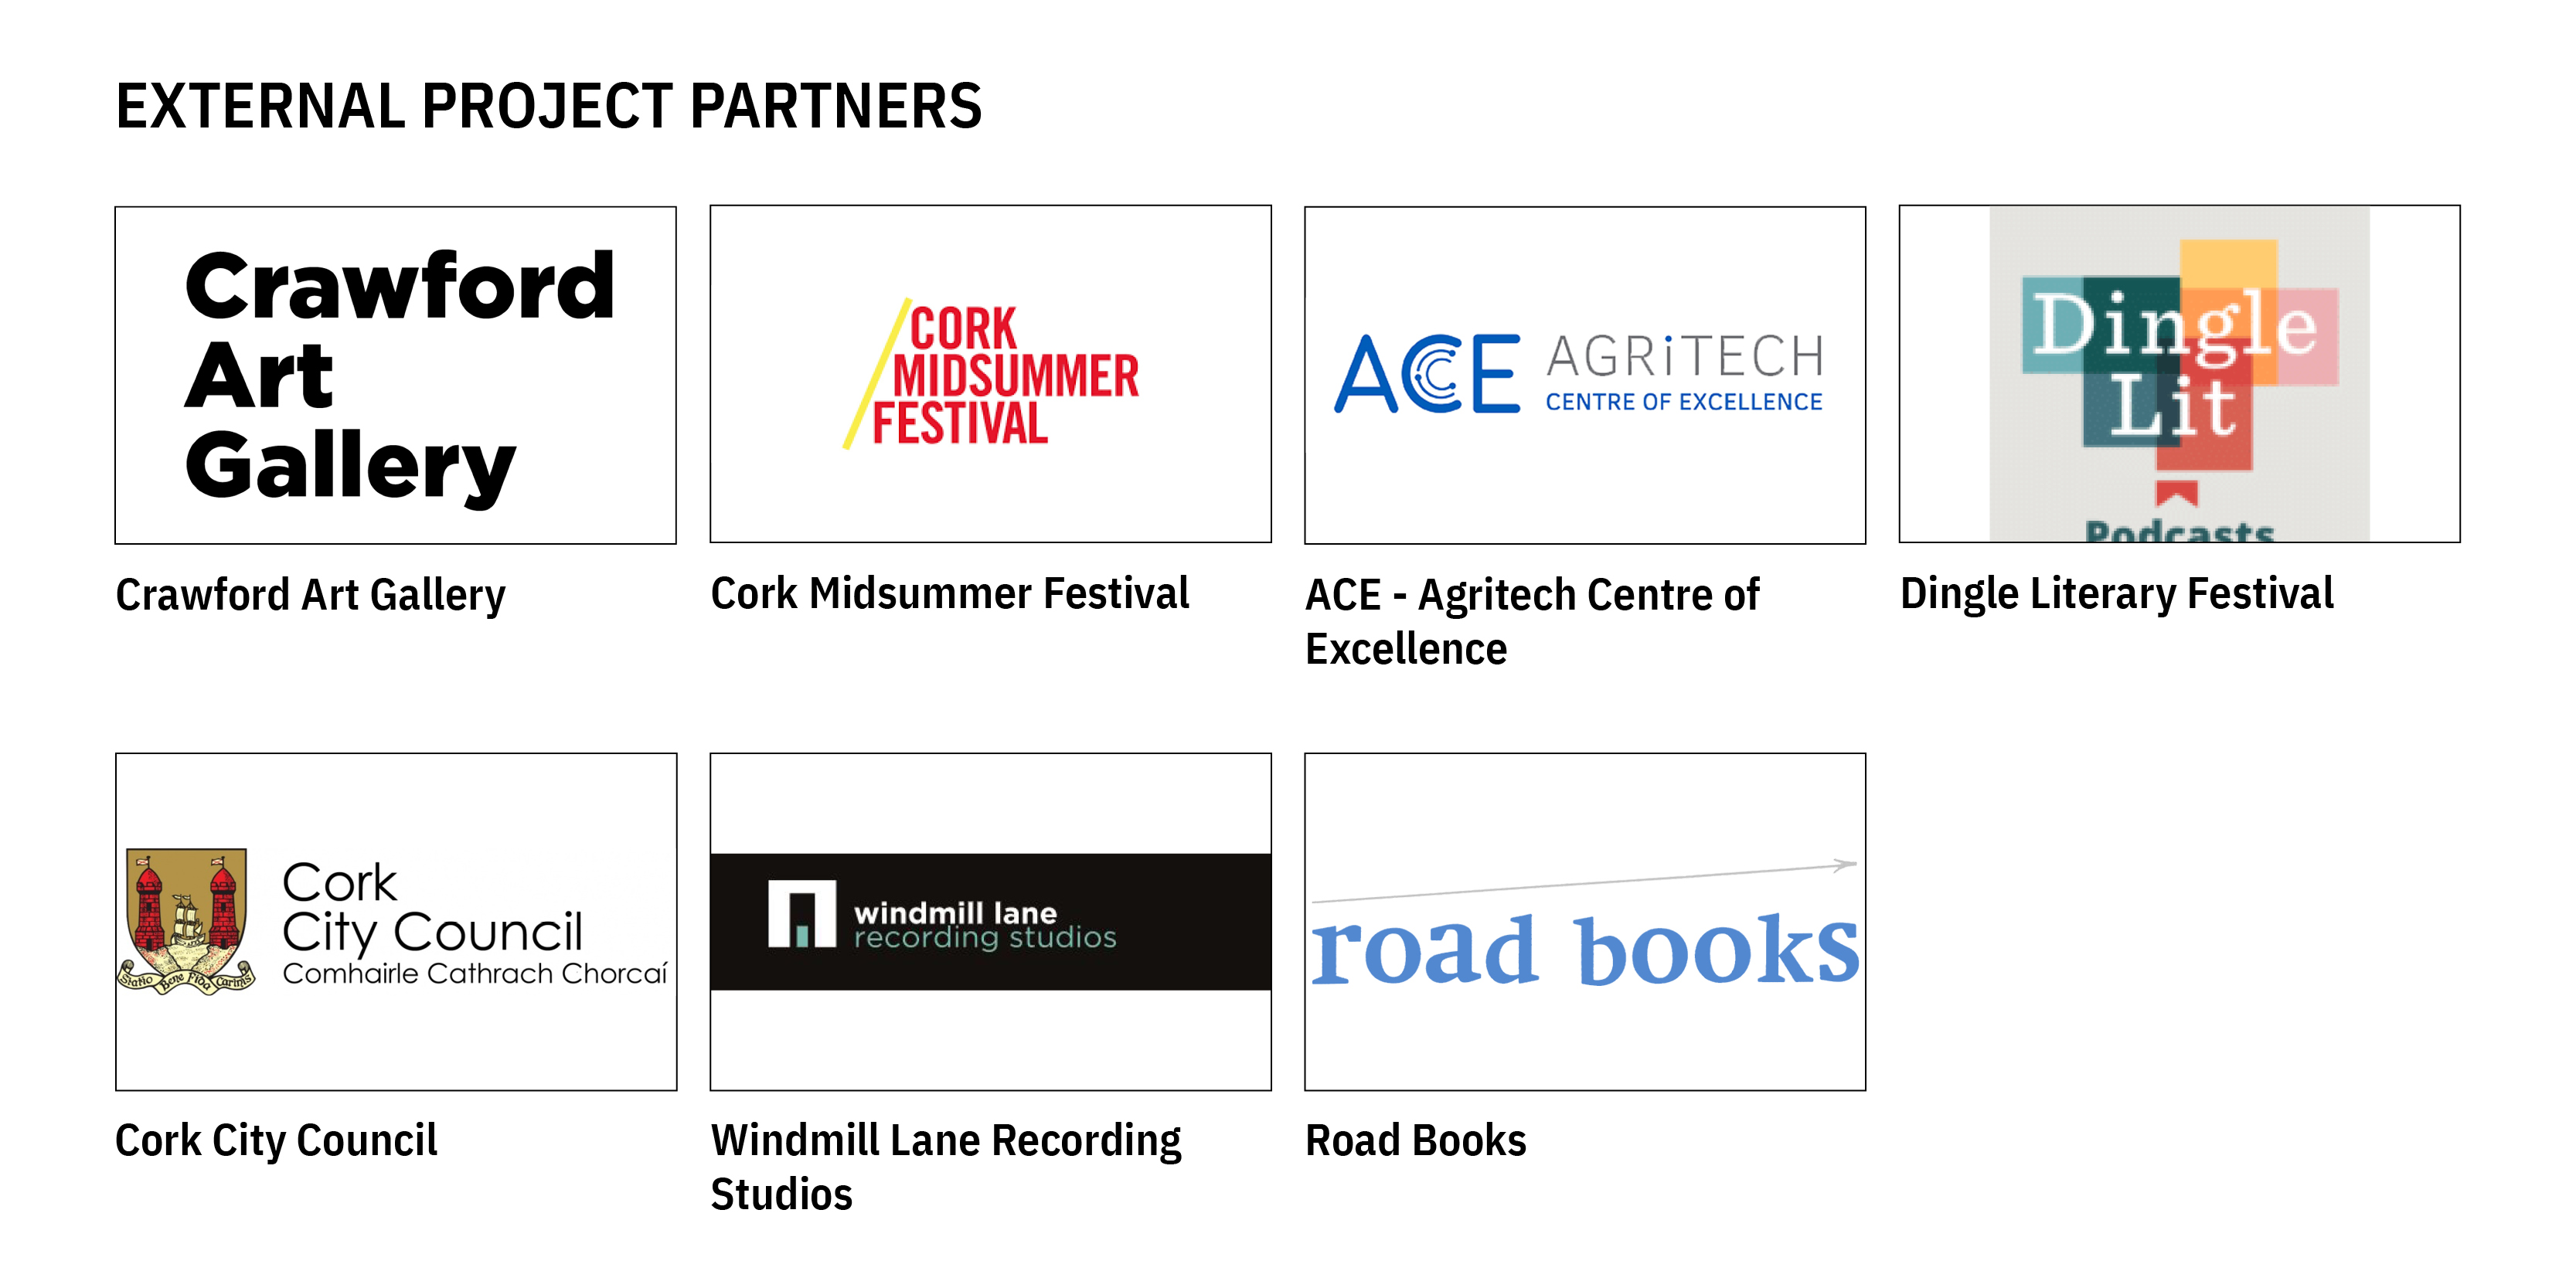 External Project Partners: Crawford Art Gallery, Cork Midsummer Festival, ACE - Agritech Centre of Excellence, Dingle Literary Festival, Cork City Council, Windmill Lane Recording Studios, Road Books